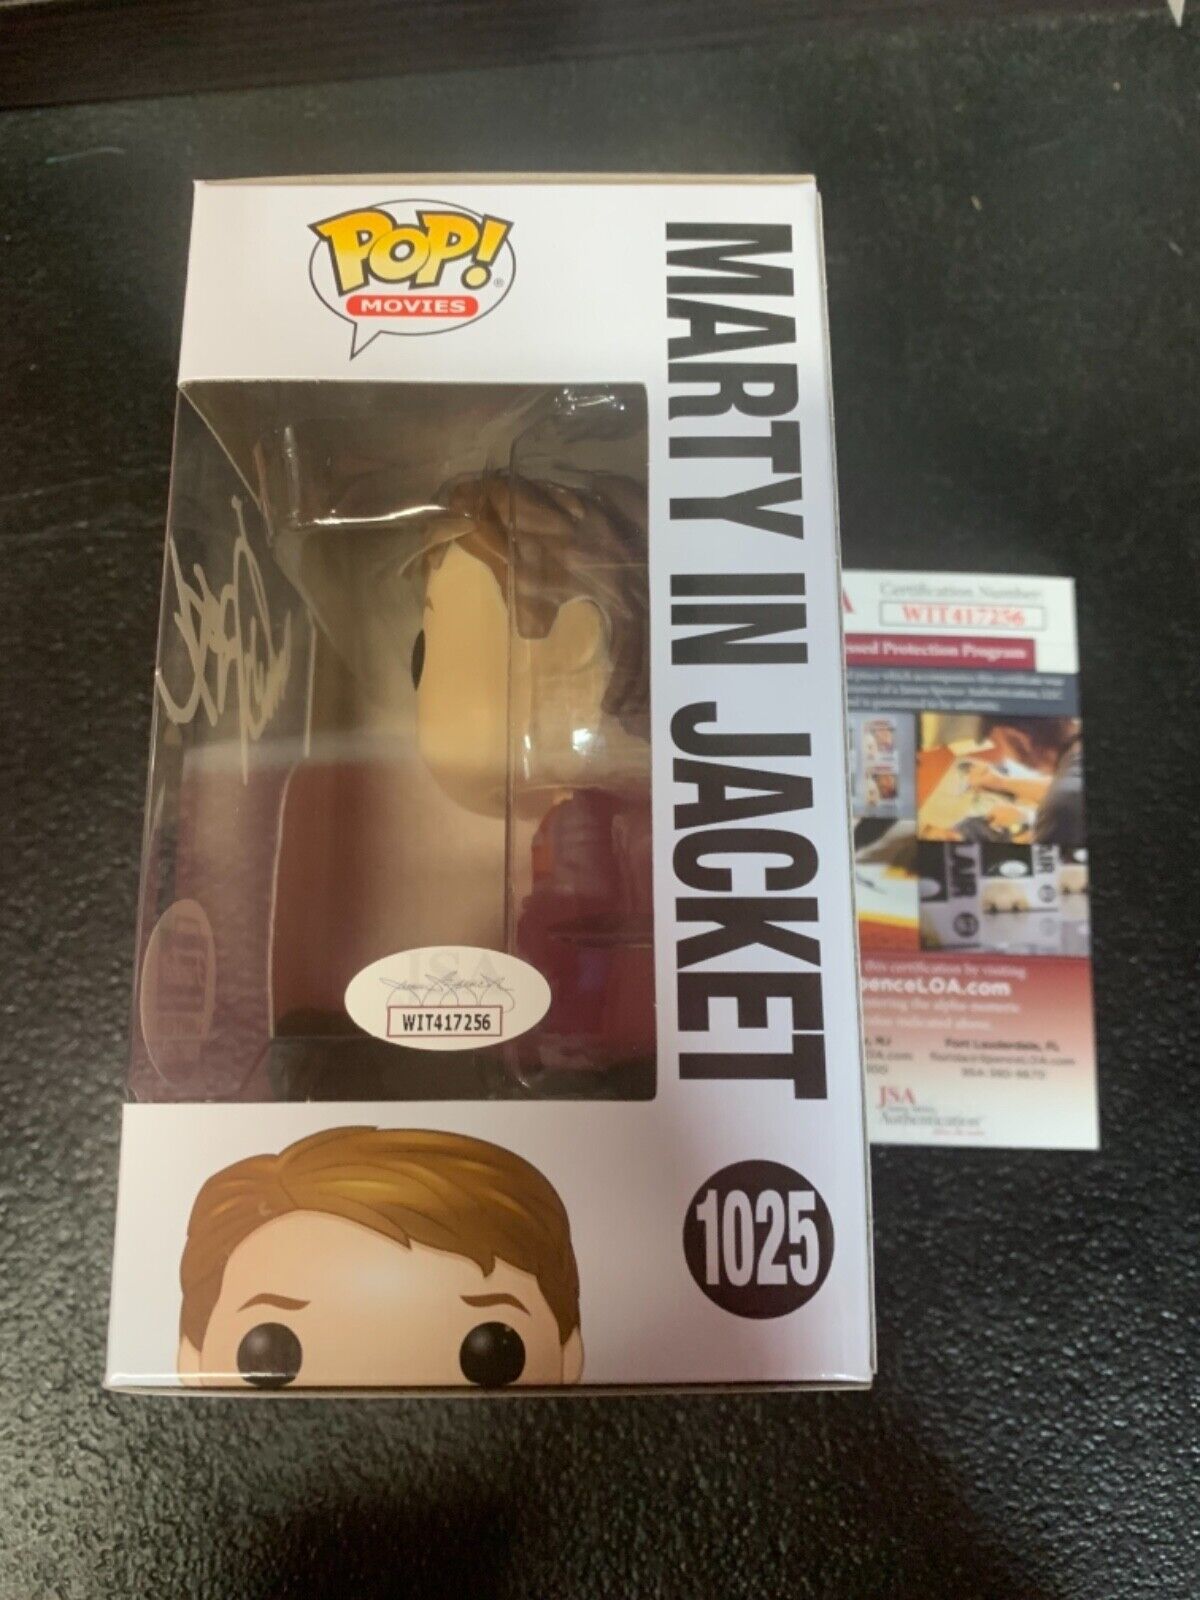 Michael J Fox “Marty In Jacket” Funko Pop Autographed JSA Back to the Future